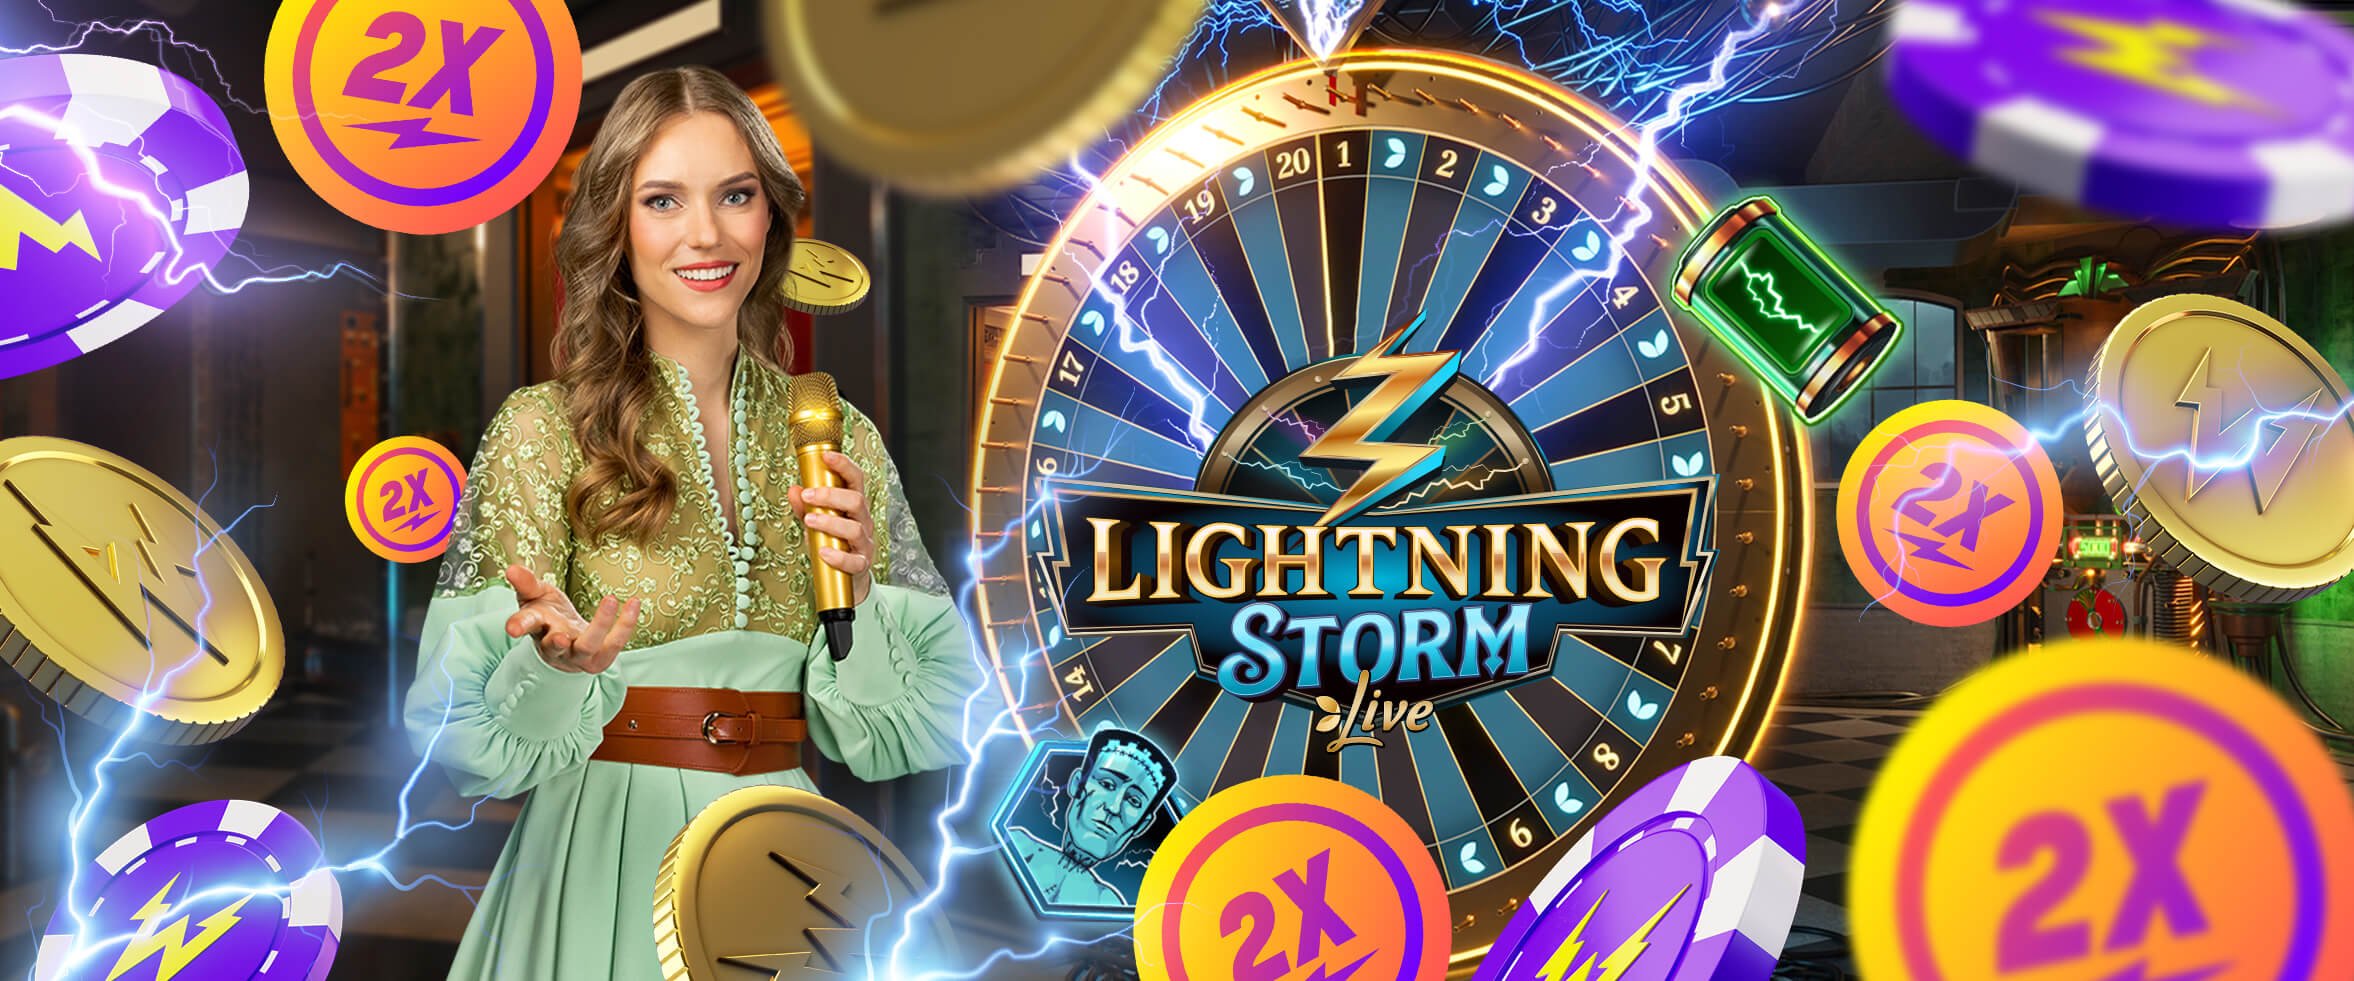 Luck Strikes More Than Twice In New Live Slot!